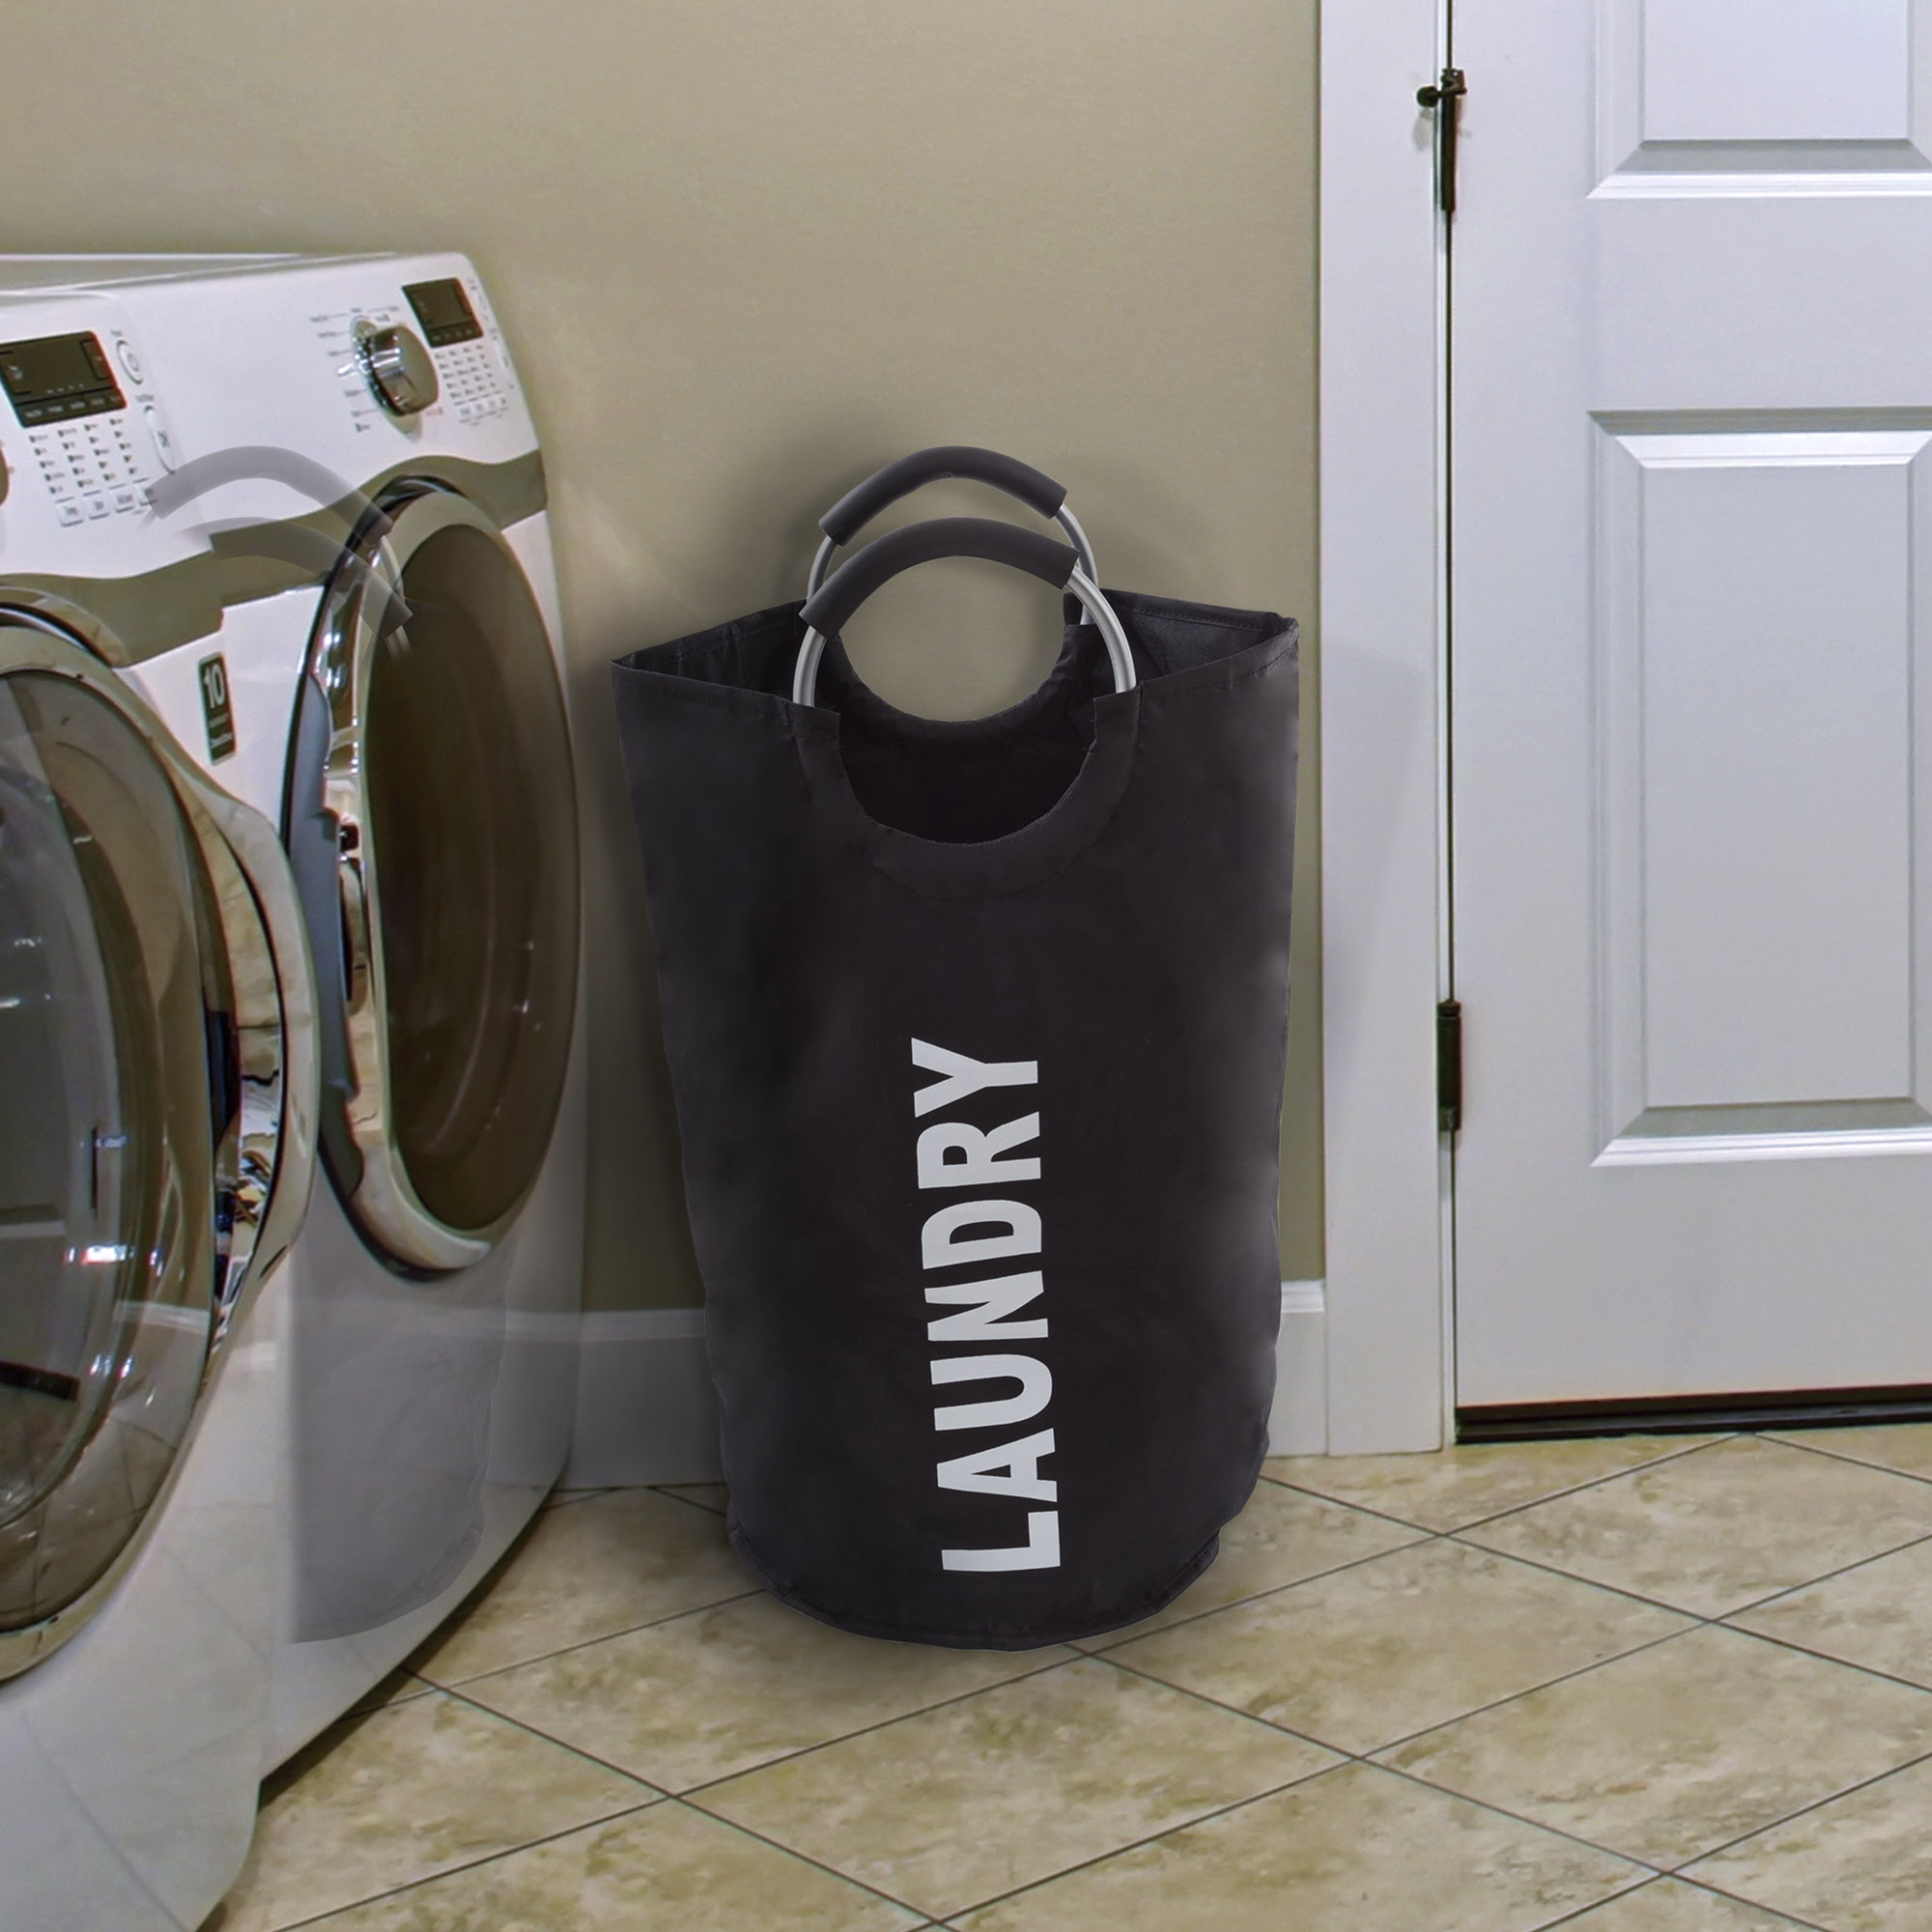 Laundry Hamper Large Collapsible Canvas Clothes Basket with Round Handles for Convenient Carrying by Lavish Home (For Home Nursery and Dorms) - image 2 of 6